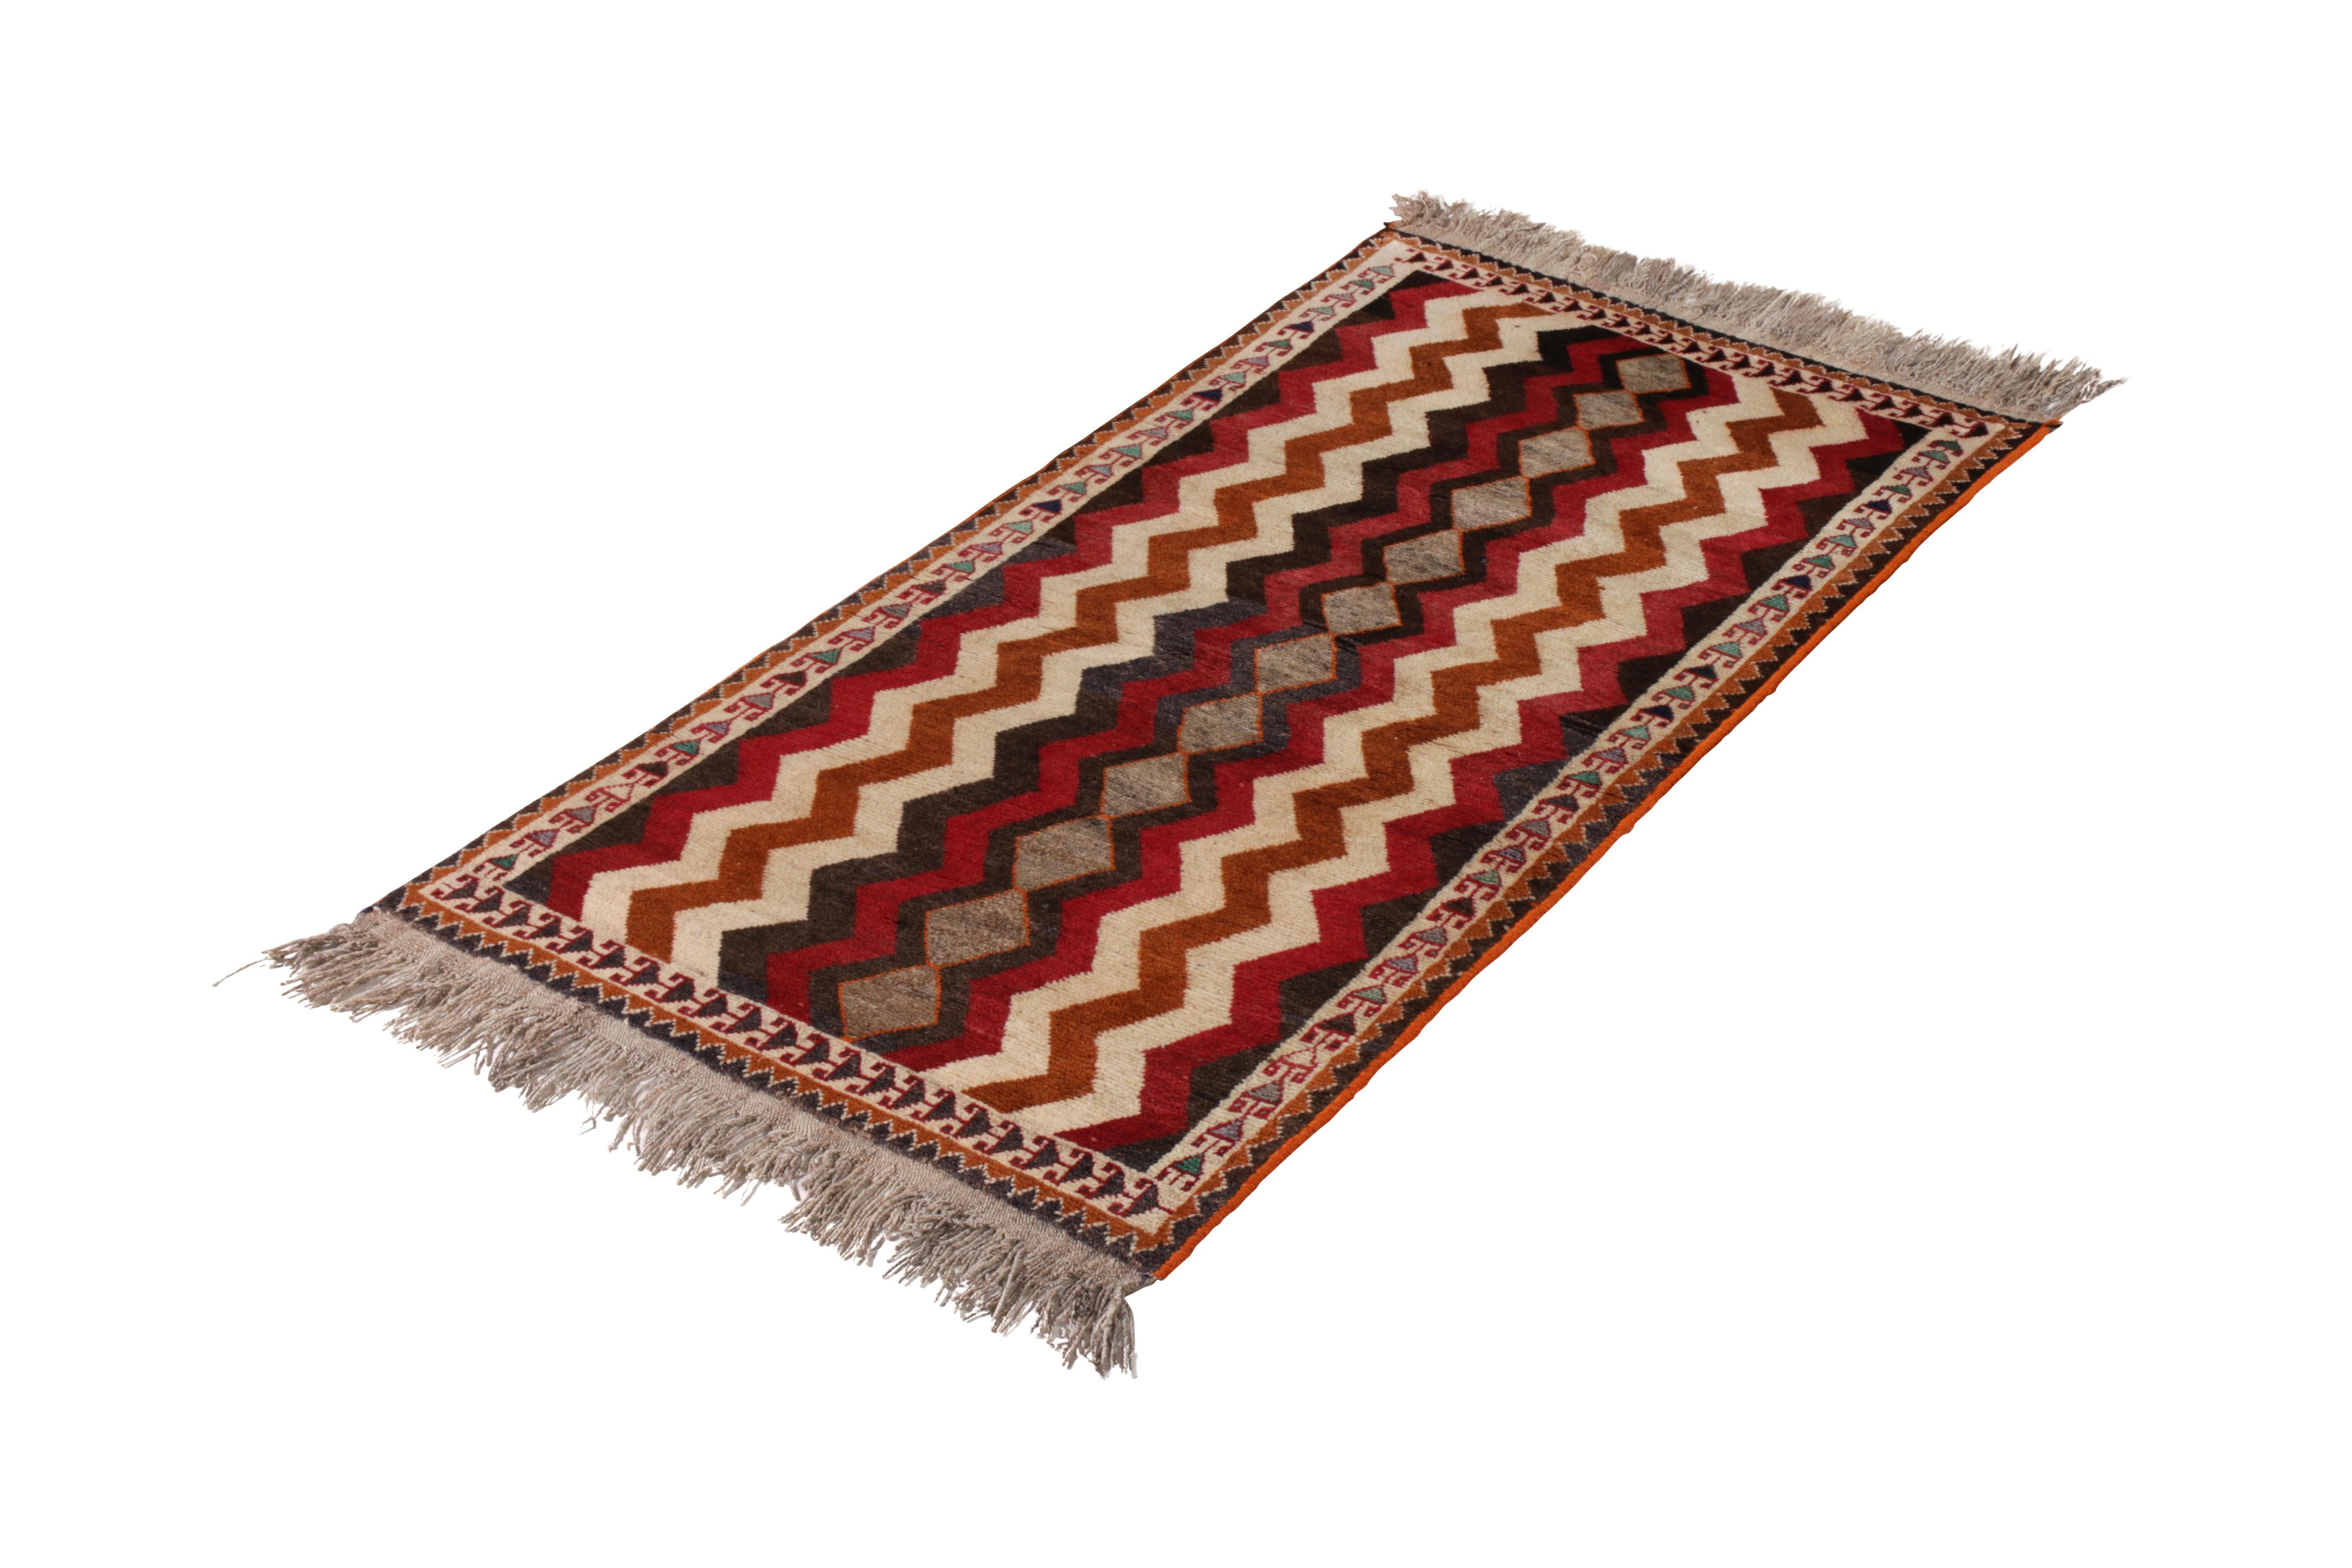 Made with hand knotted wool originating circa 1910-1920, this antique Persian runner celebrates a classic Gabbeh rug chevron pattern venerated in this distinguished family of Oriental rugs of tribal sensibility. The mirroring of the pattern along a